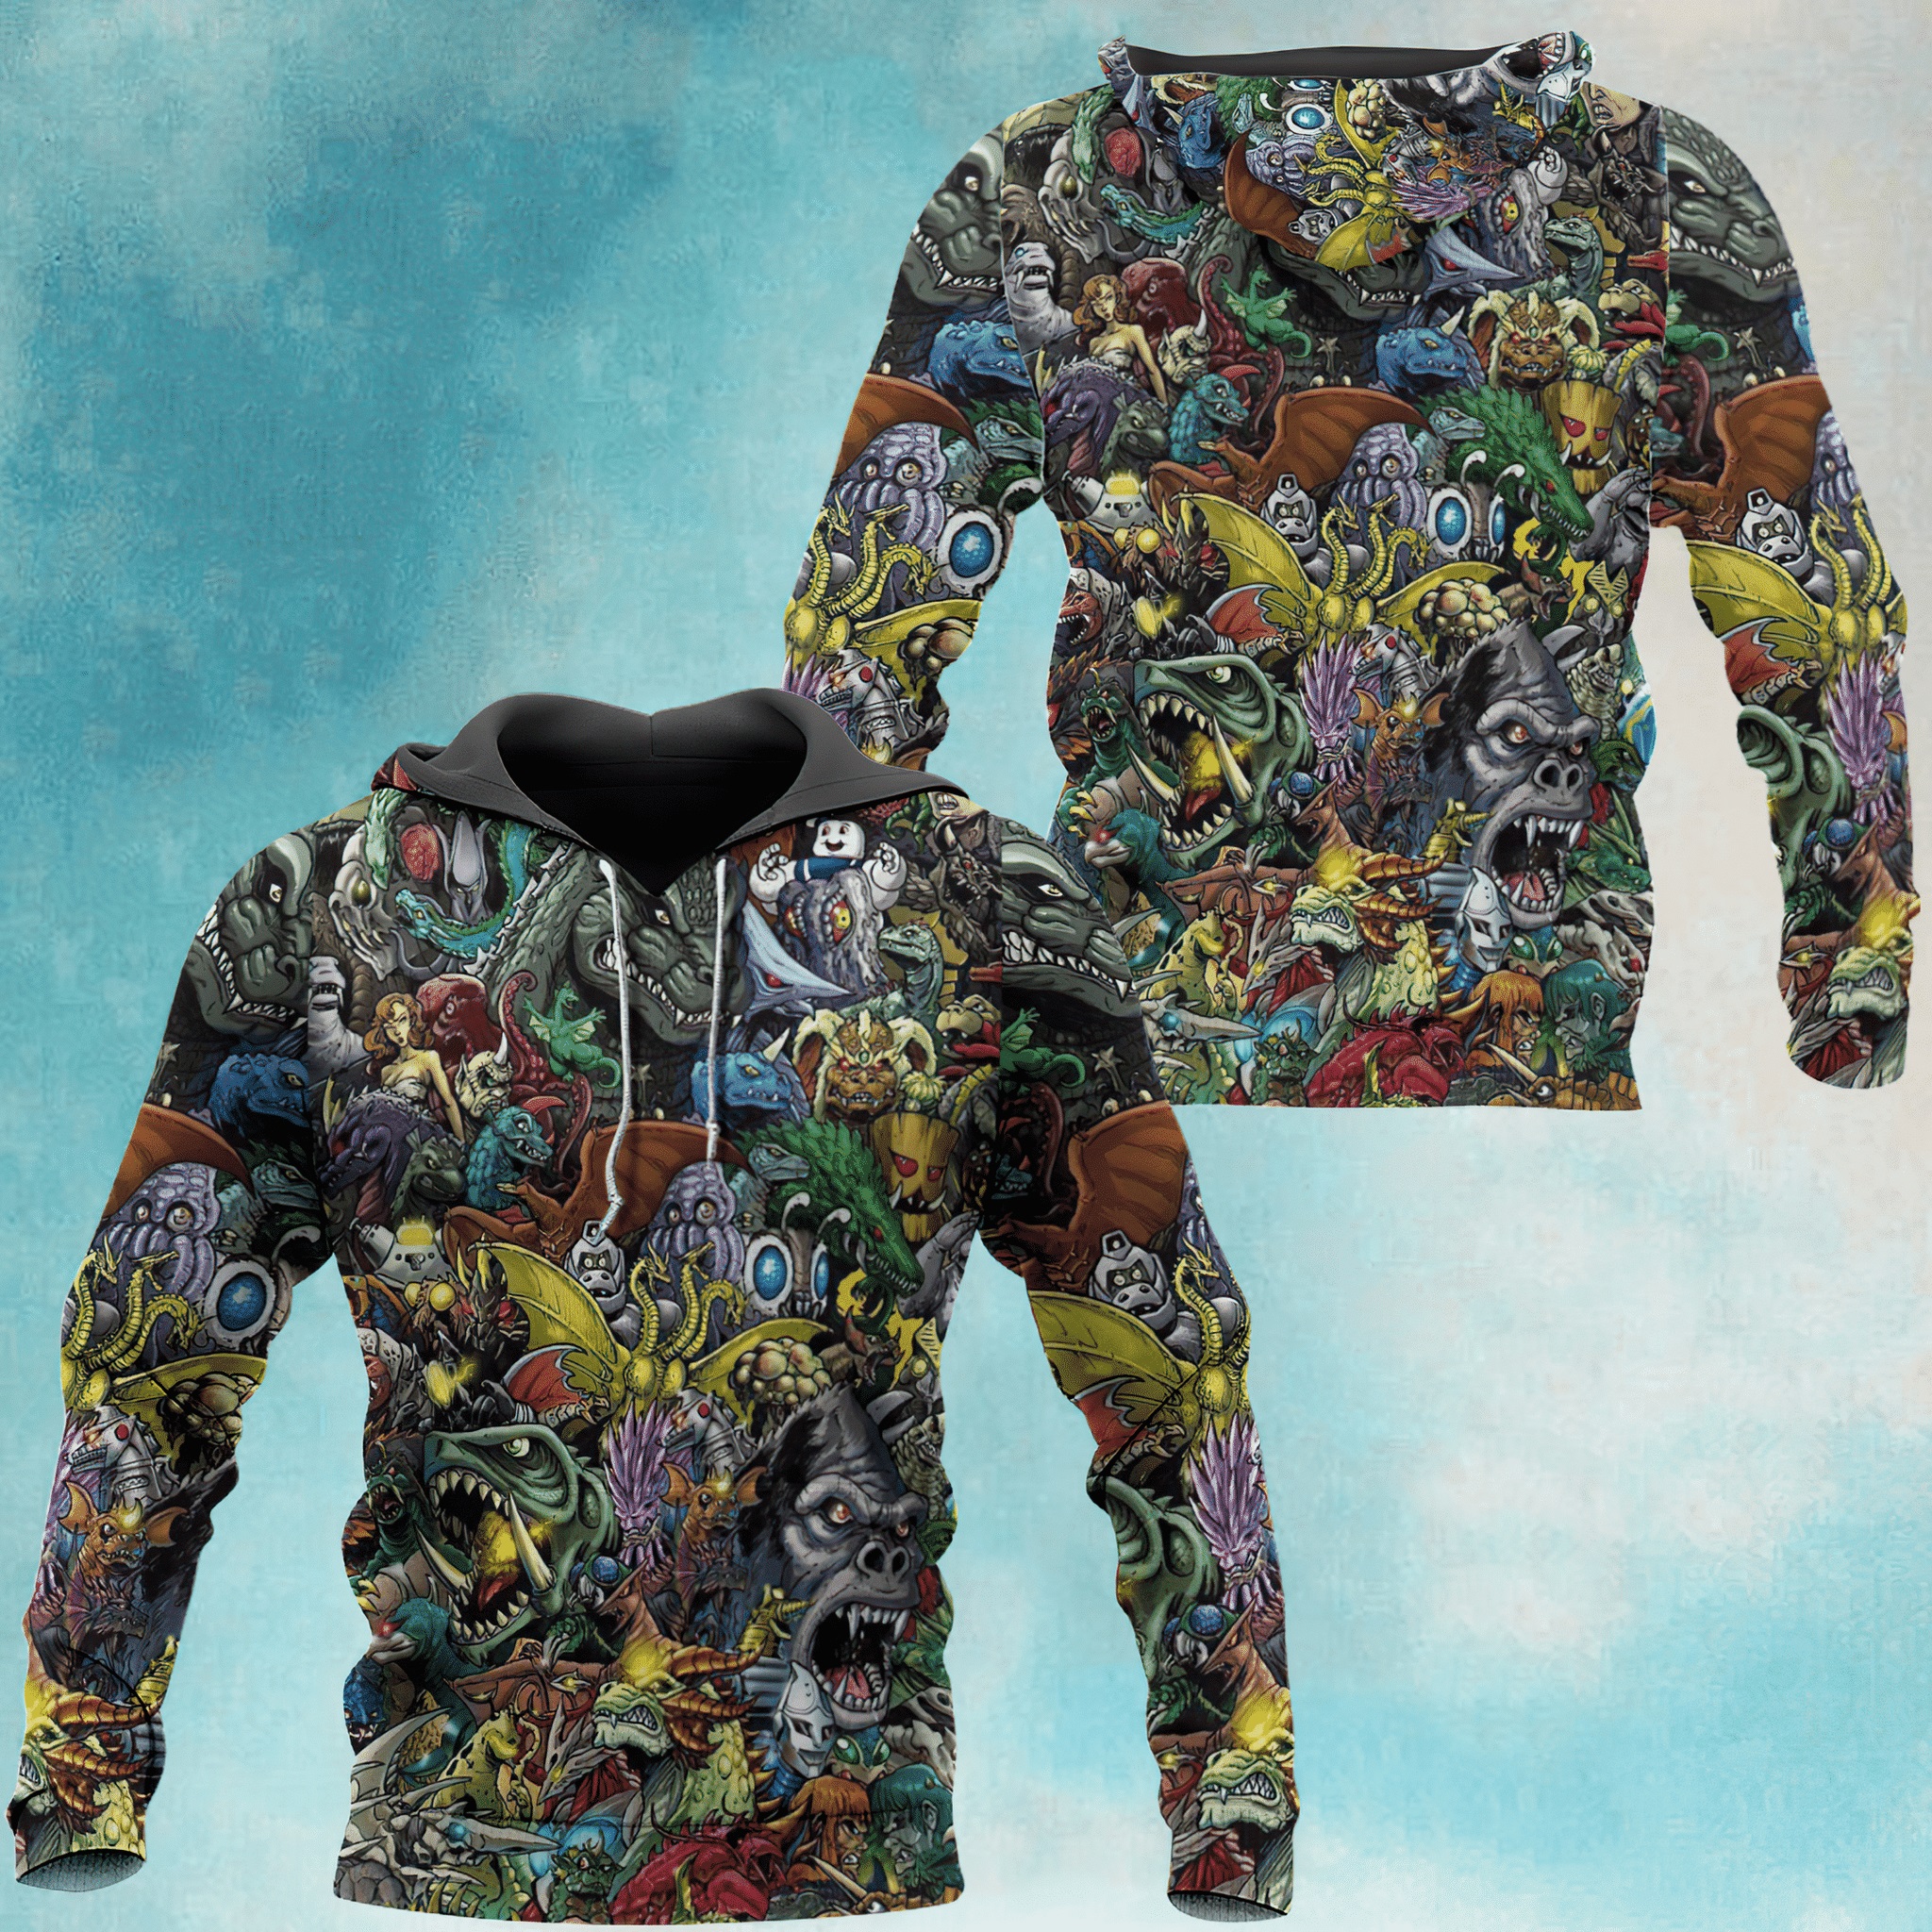 Welcome to the world of Godzilla hoodie